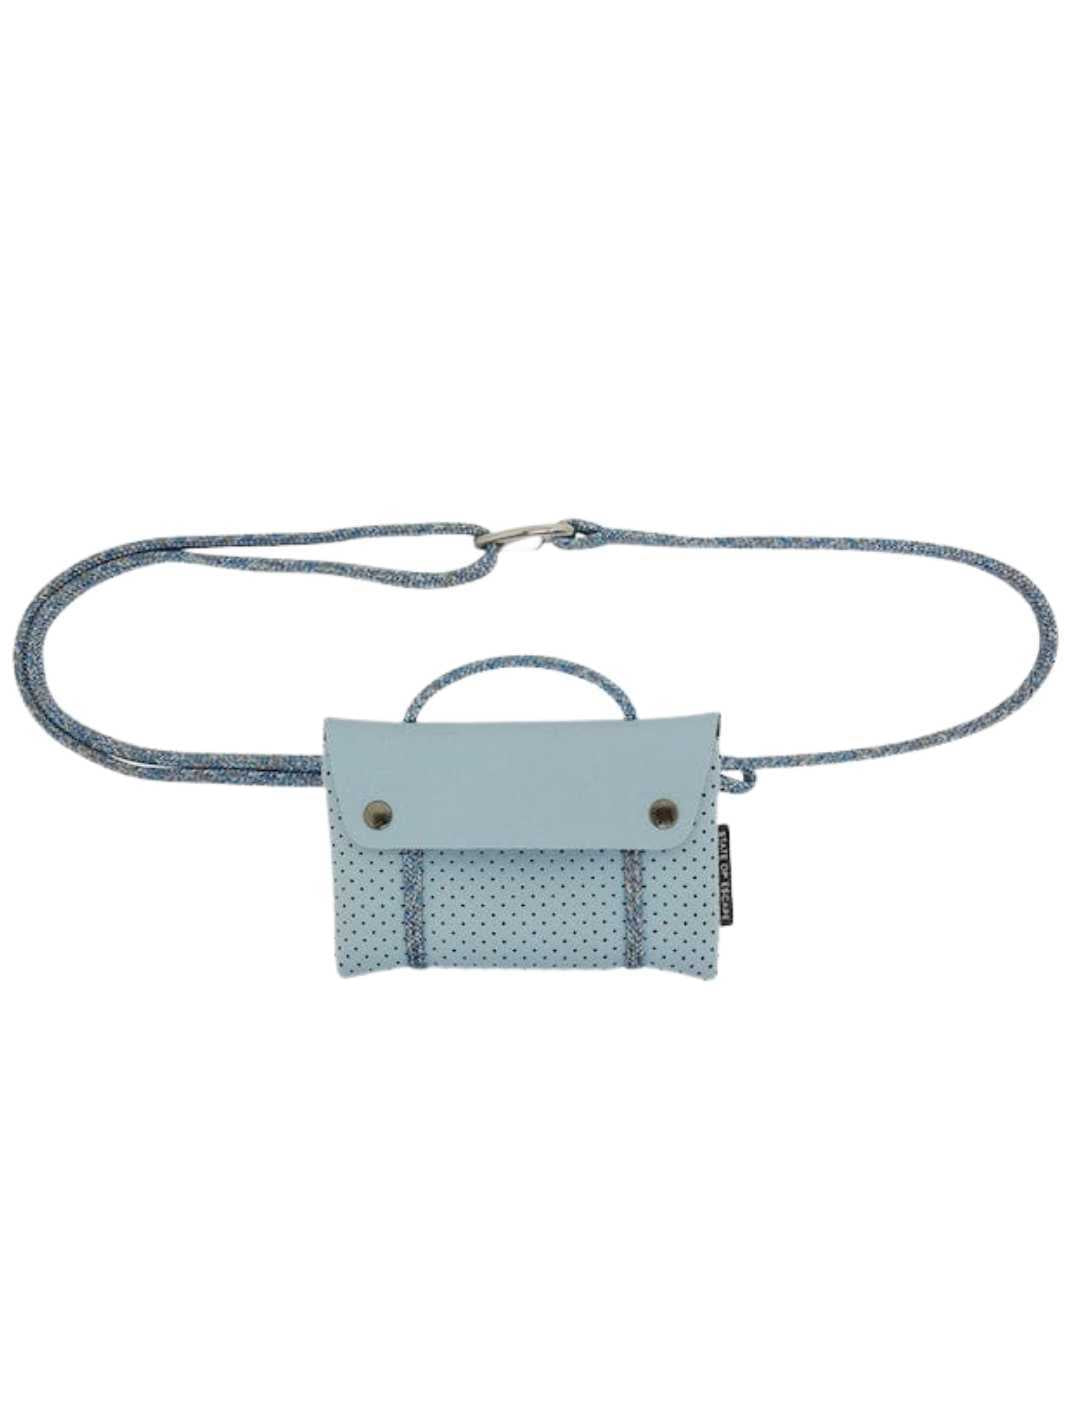 State of Escape Bags Baby Blue Bag | Compass Belt Bag Baby Blue